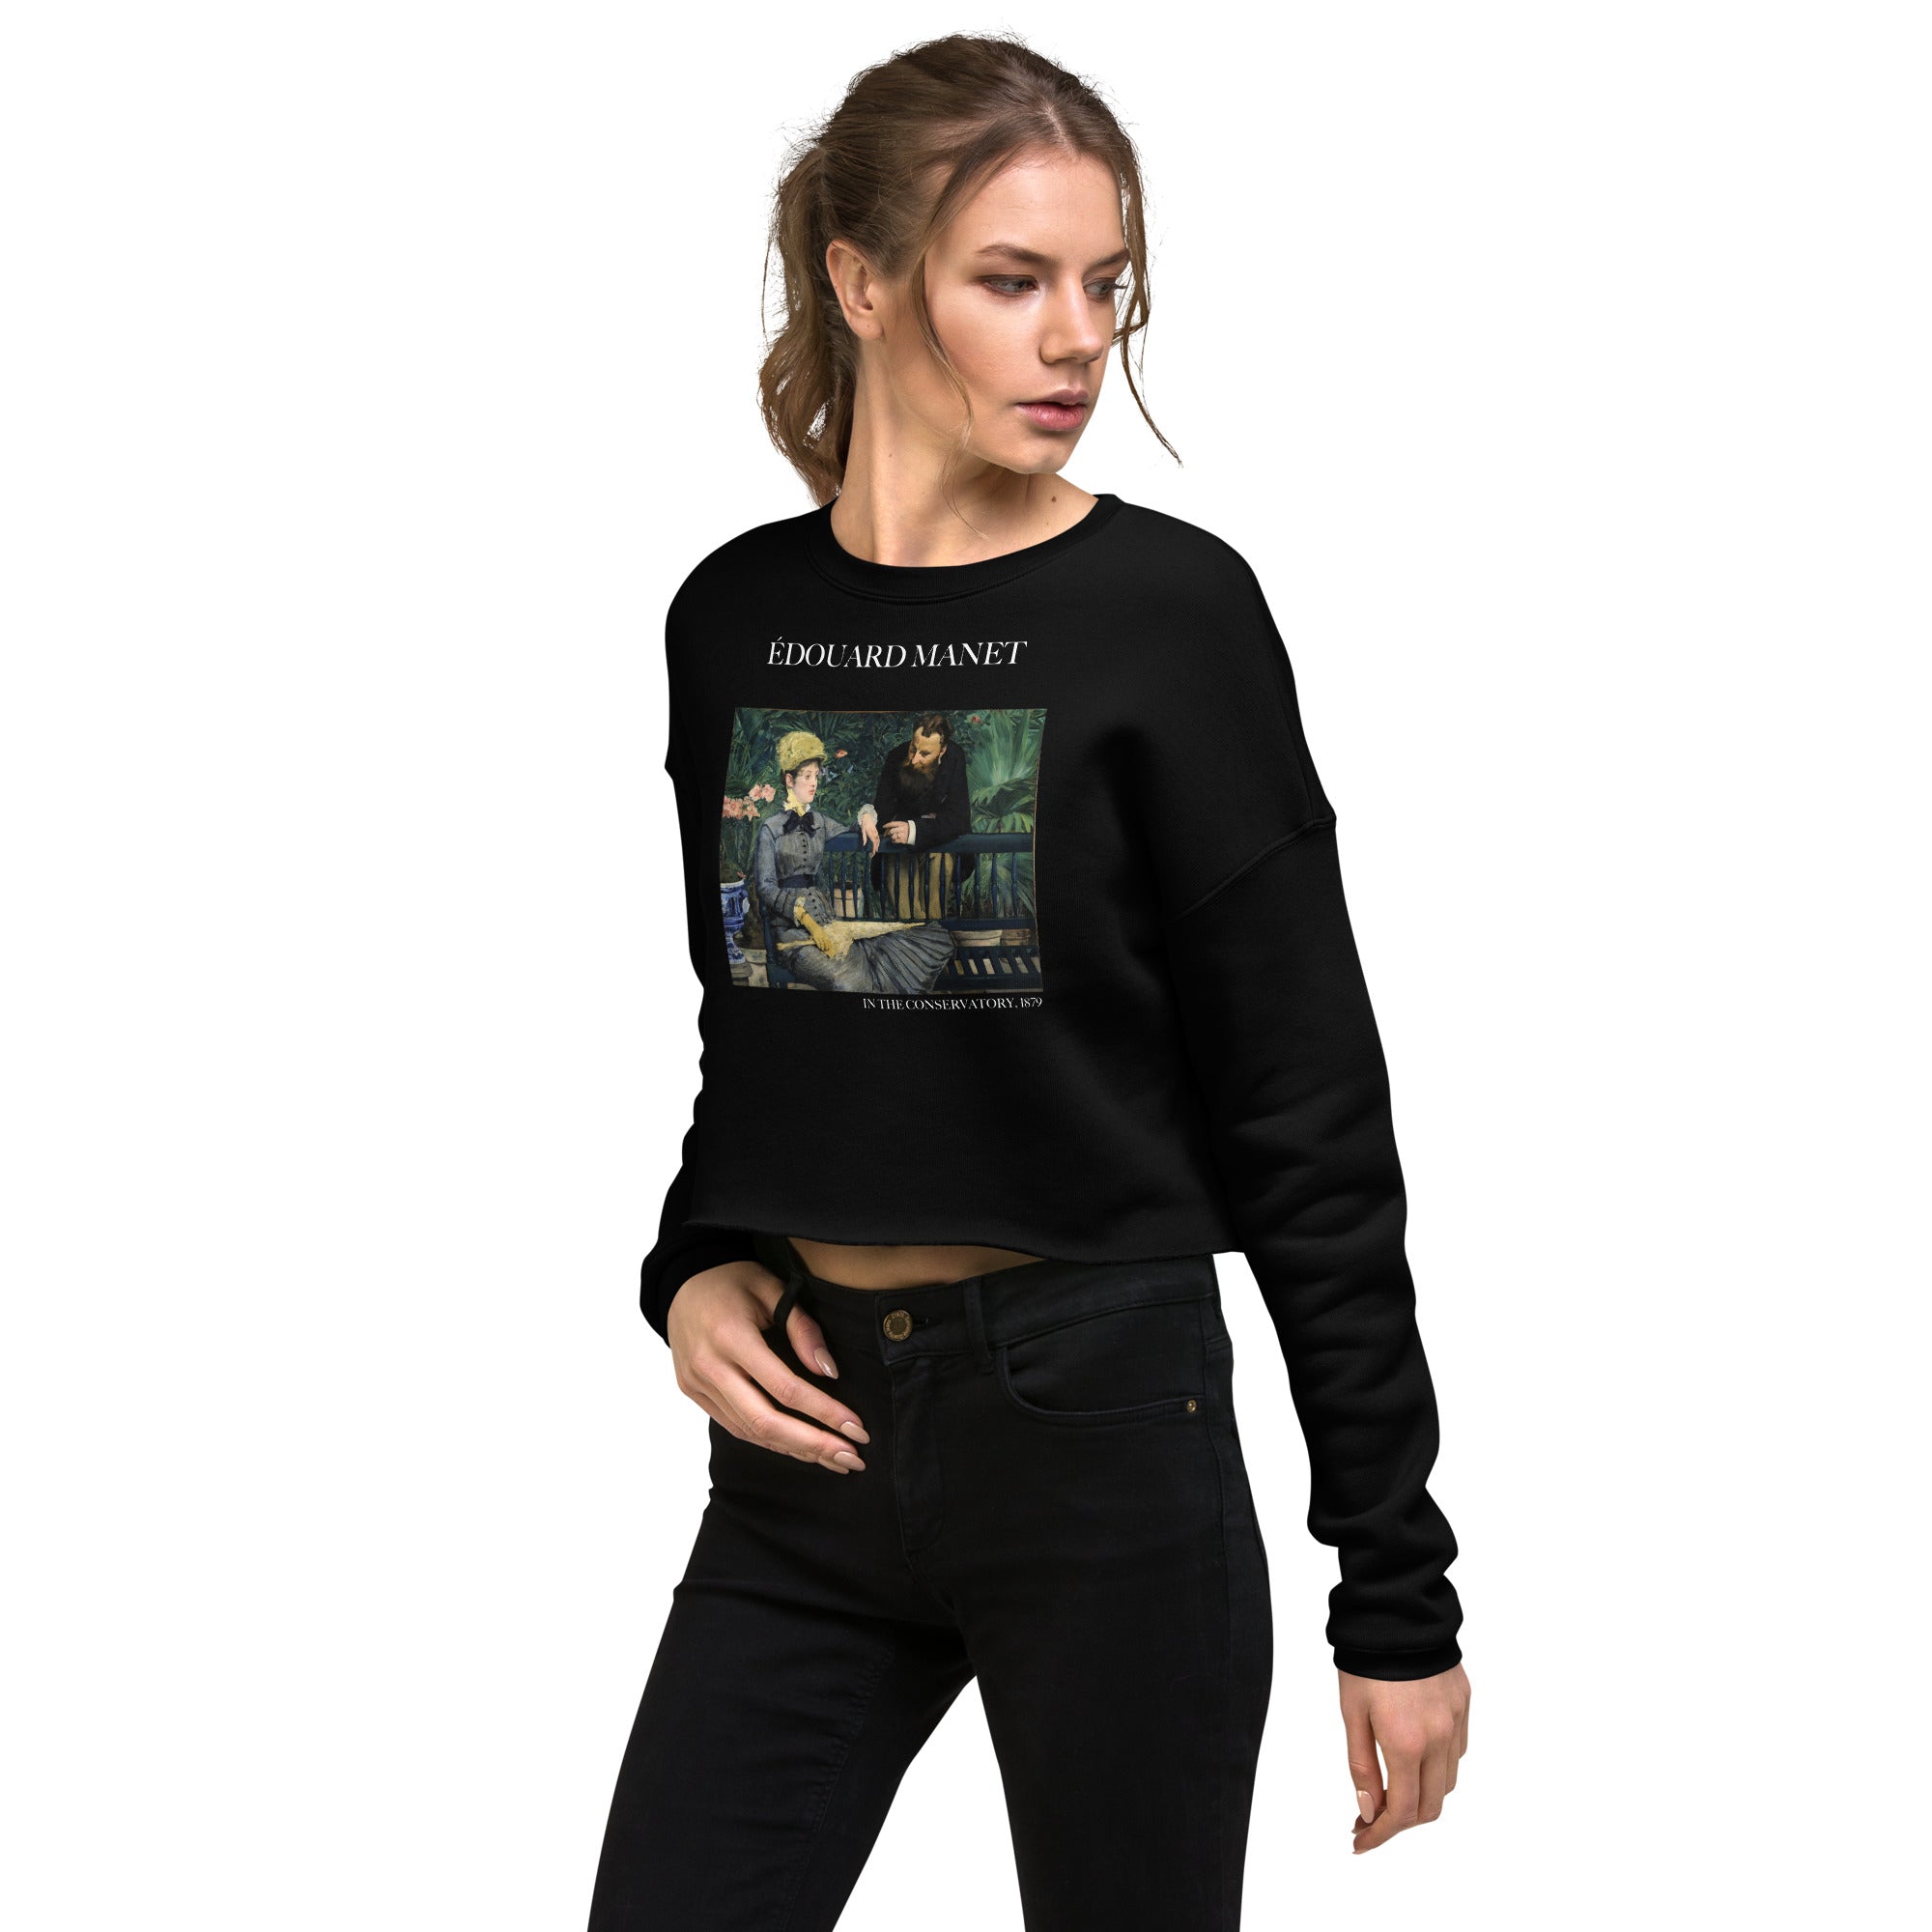 Édouard Manet 'In the Conservatory' Famous Painting Cropped Sweatshirt | Premium Art Cropped Sweatshirt